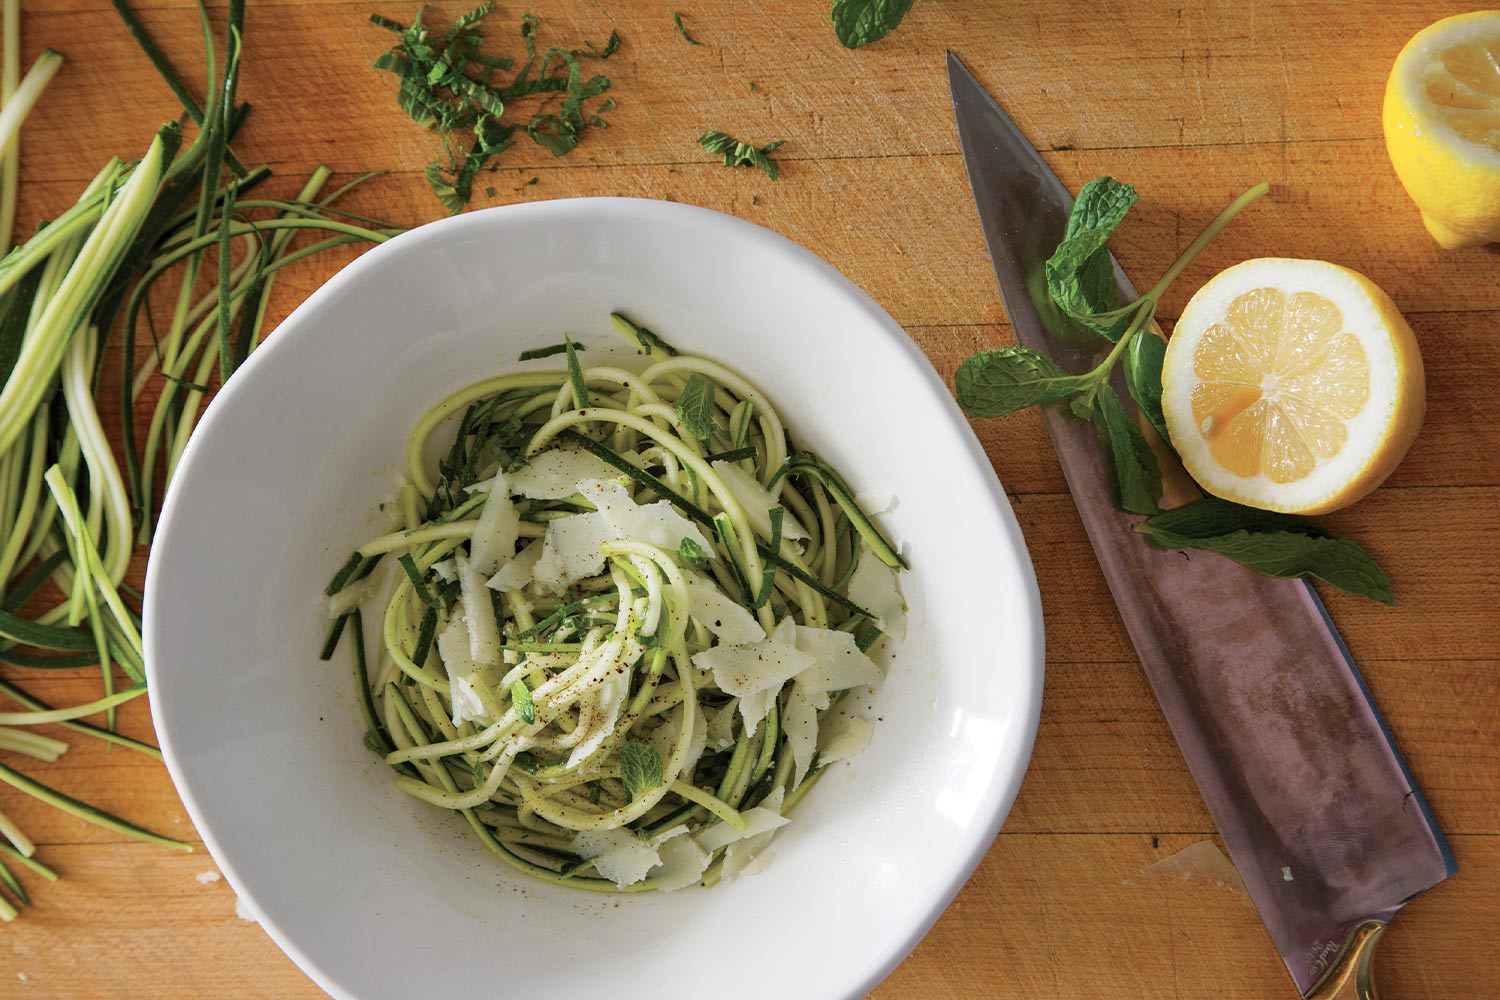 Zucchini salad with mint and lemons in a white bowl